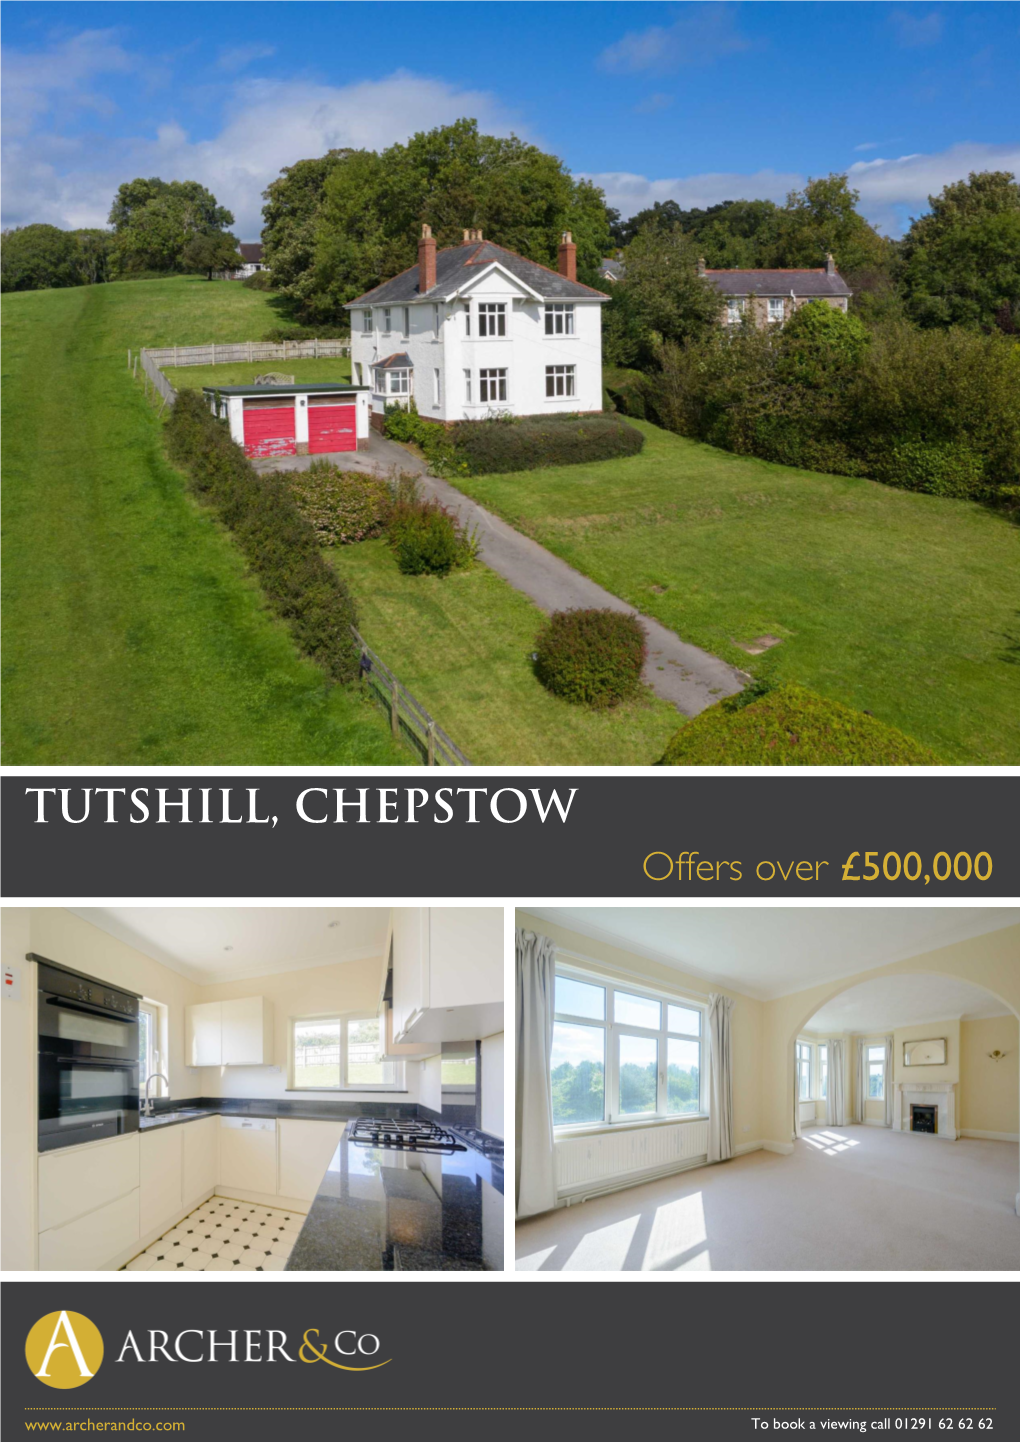 TUTSHILL, CHEPSTOW Offers Over £500,000